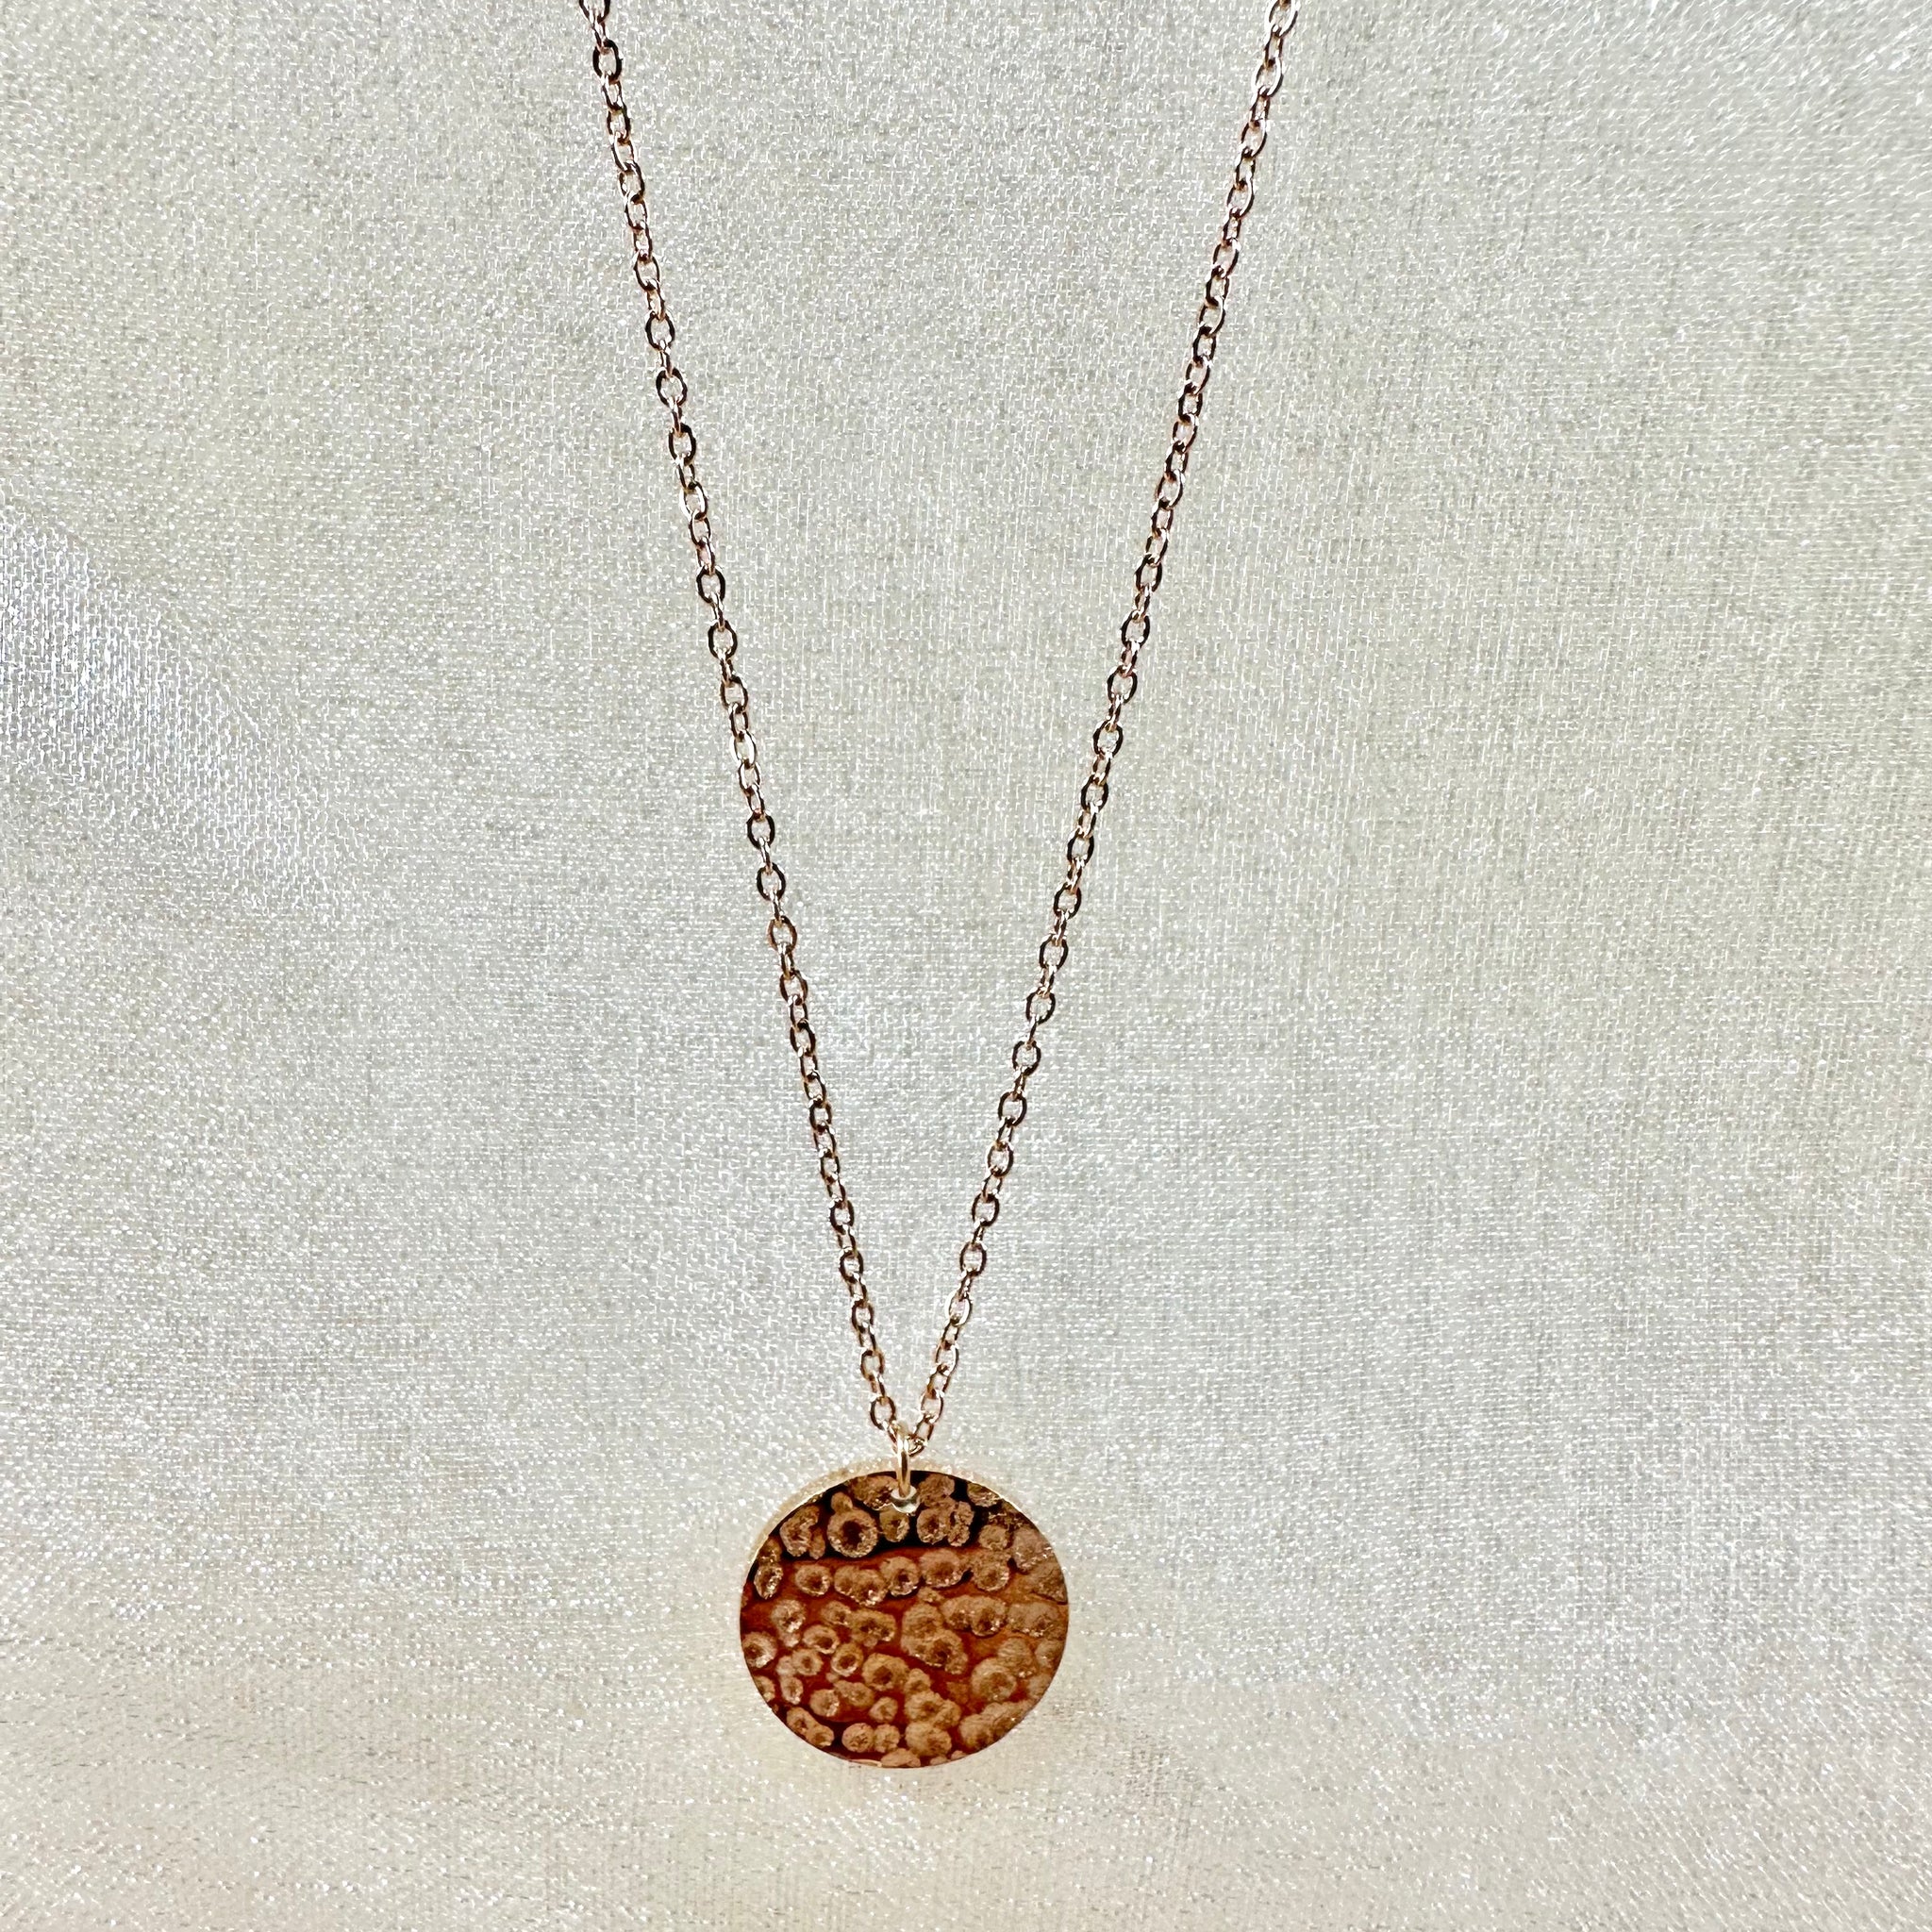 Mona Rose Gold Necklace